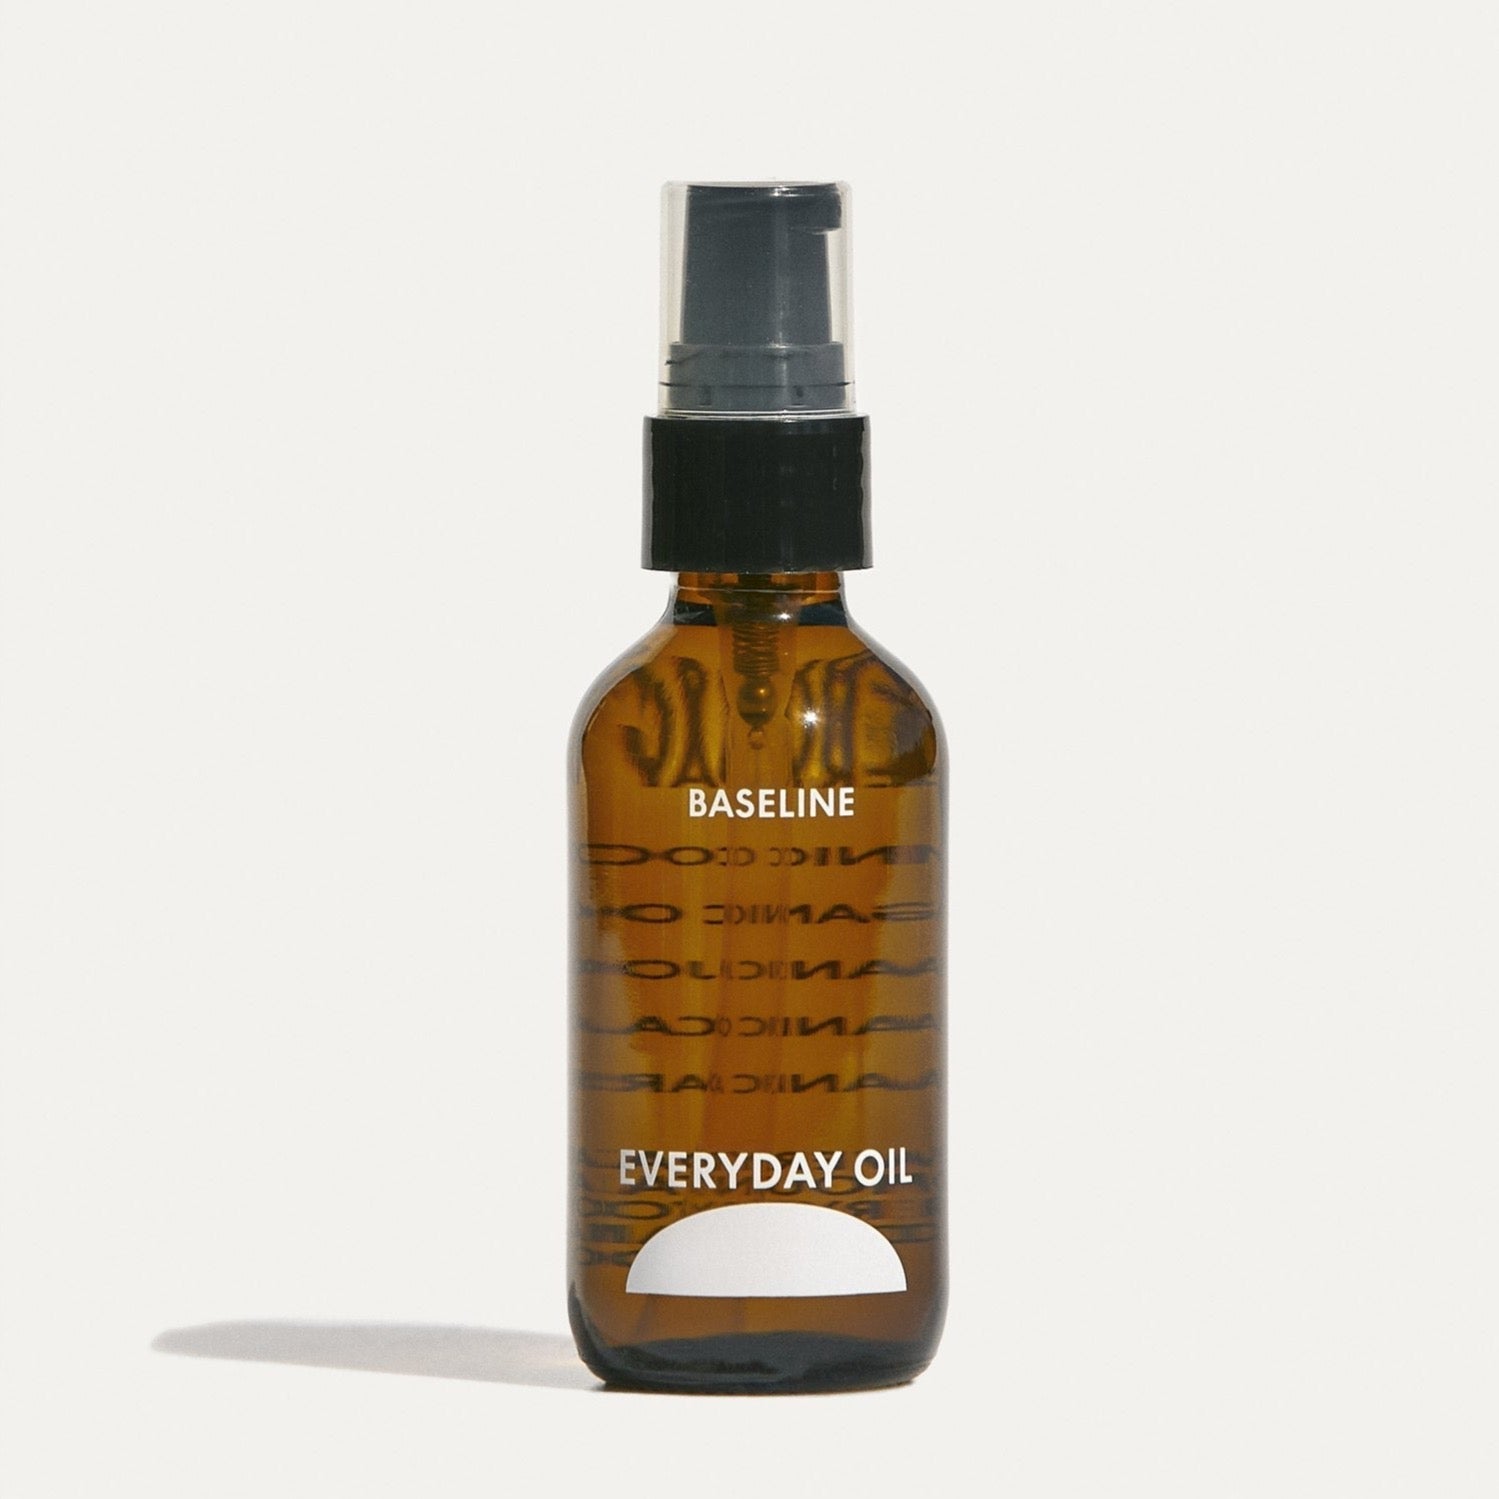 Everyday oil Baseline available at Easy Tiger Toronto